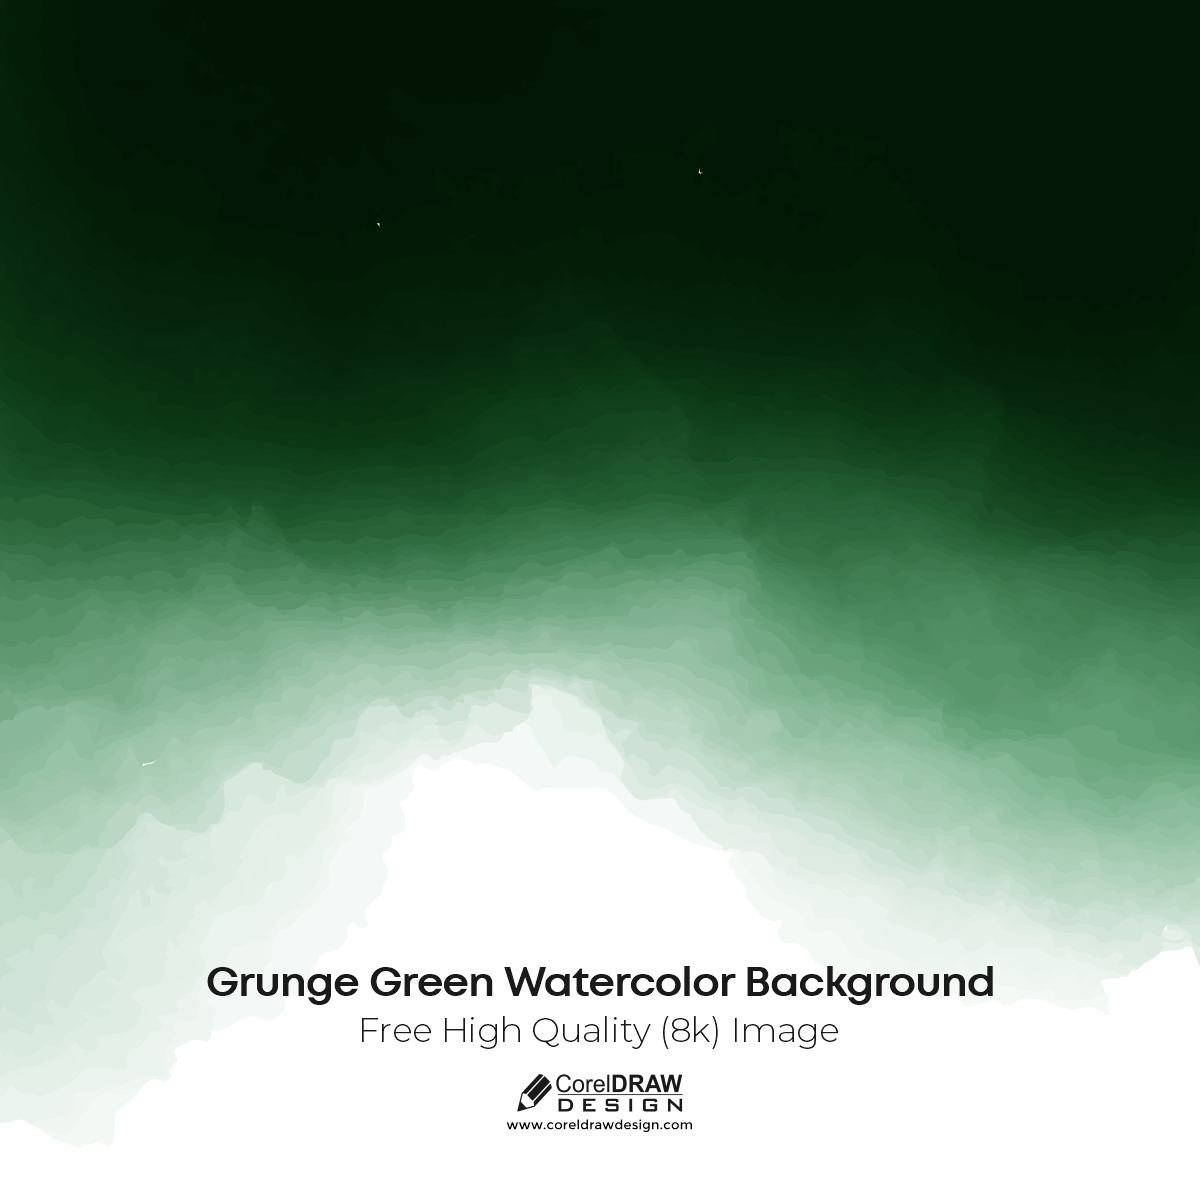 Grunge Green Watercolor Background